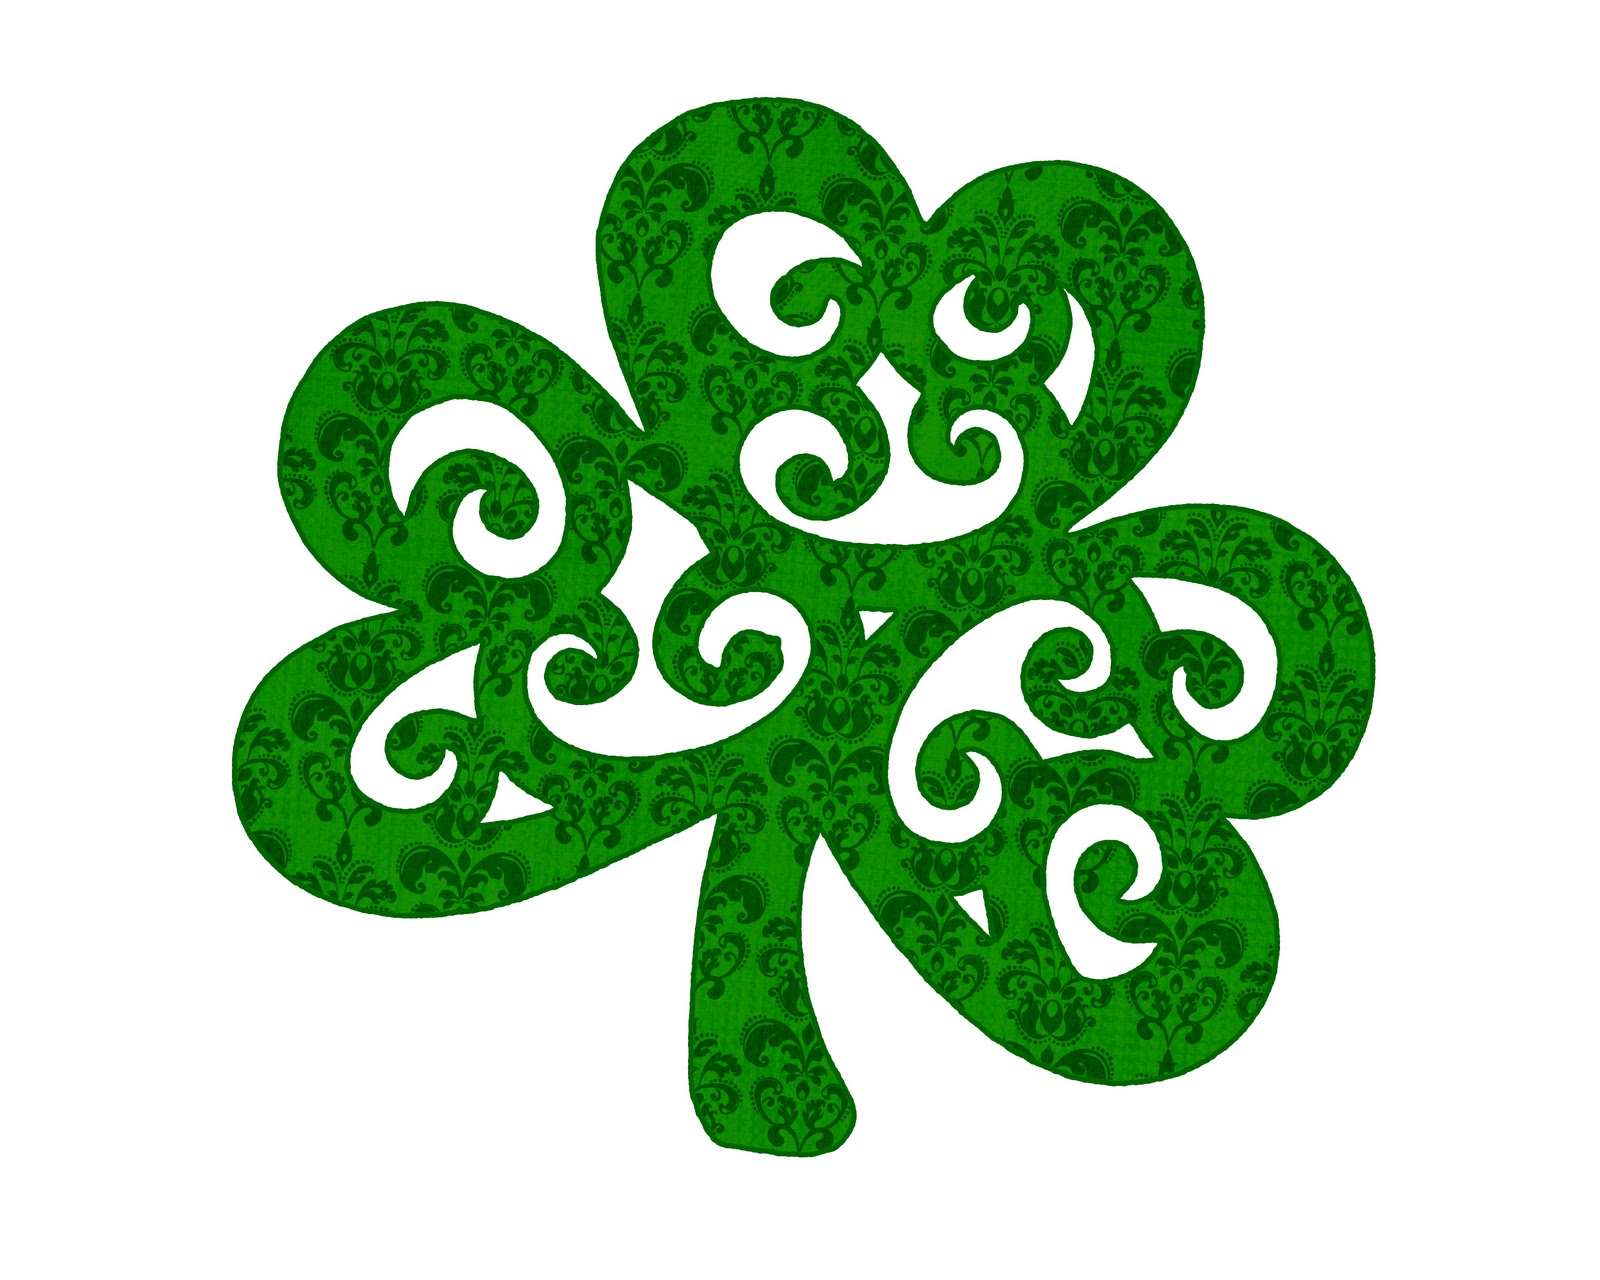 Green On St  Patrick S Day Symbolizes The Patron Saint And National